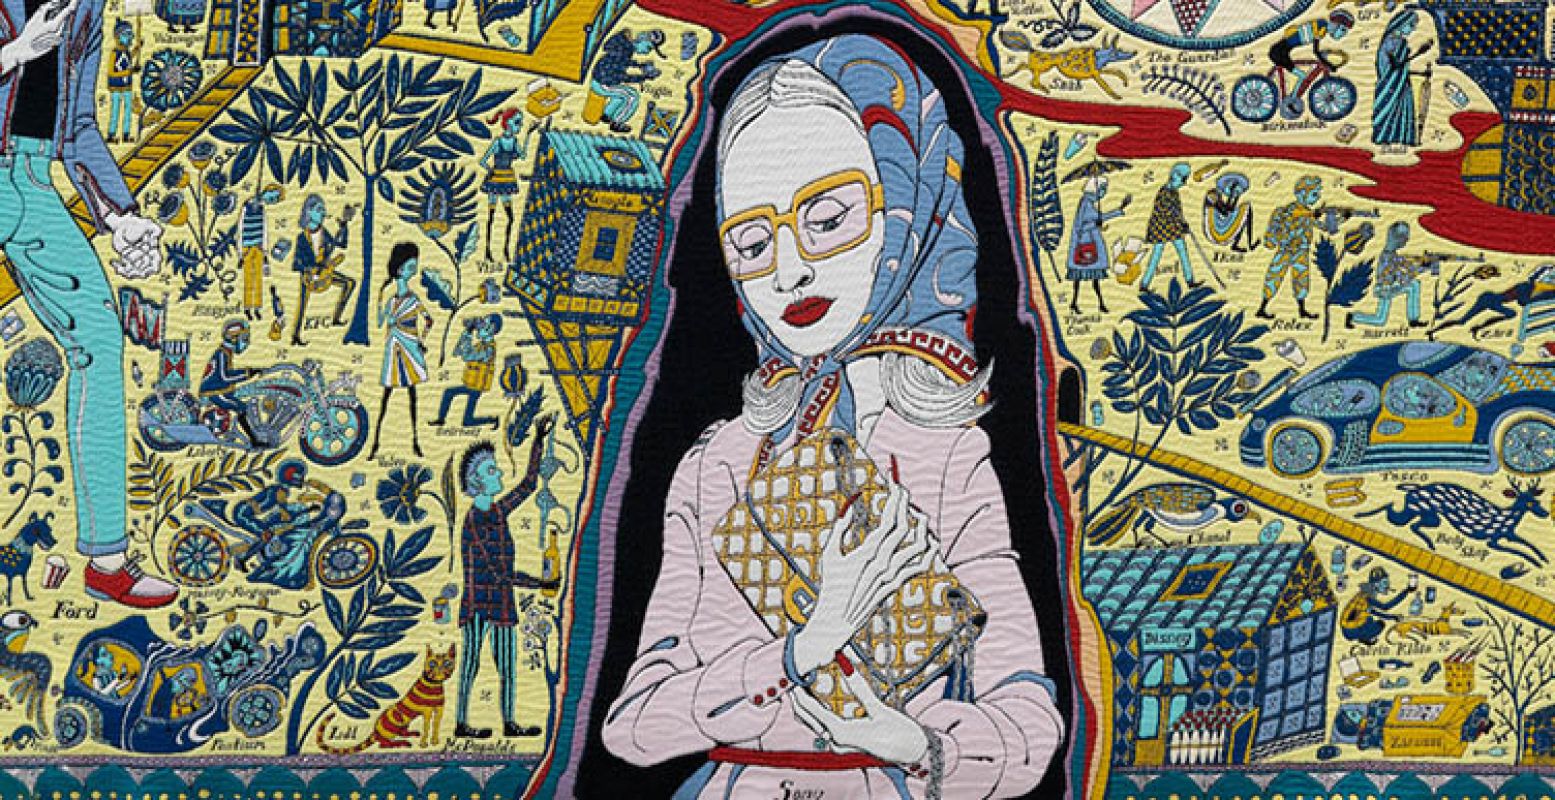 Foto: Grayson Perry, The Walthamstow Tapestry, 2009. Courtesy Bonnefantenmuseum Maastricht.